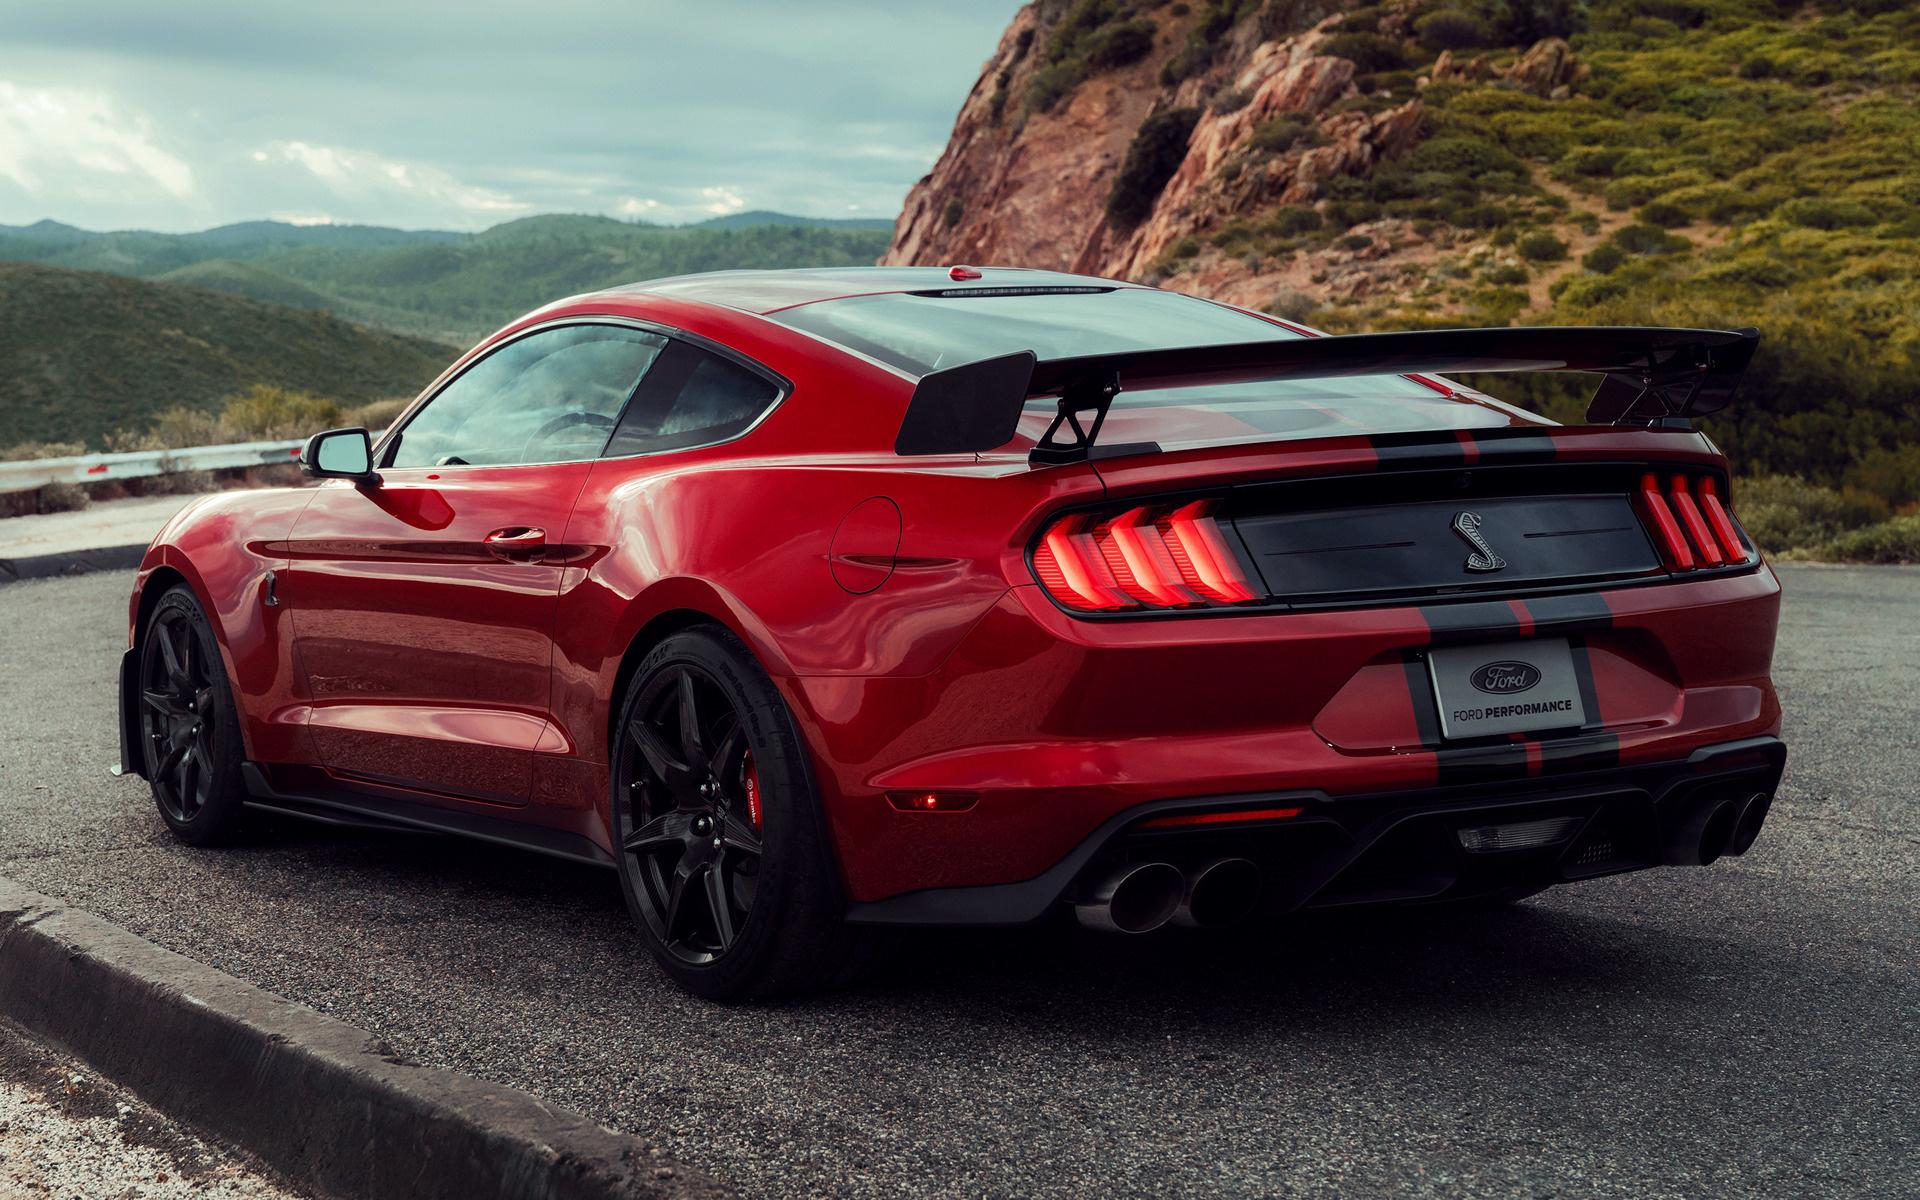 2020 Shelby GT500 Mustang